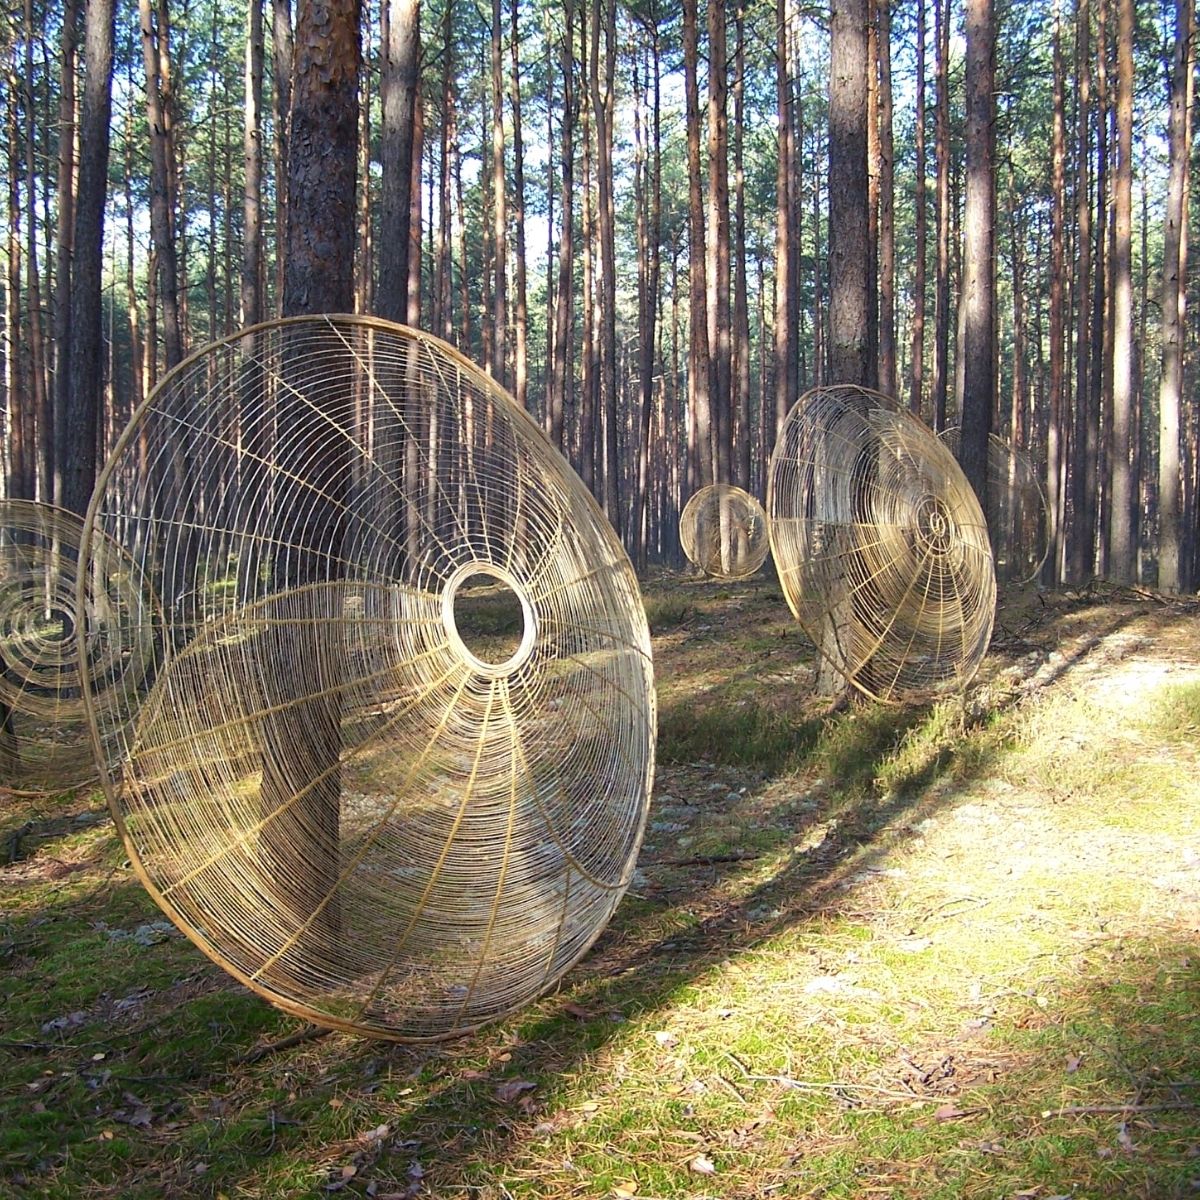 land-art-is-miroslaw-maszlankos-passion-an-unlimited-patience-to-create-with-grass-wax-and-wood-featured